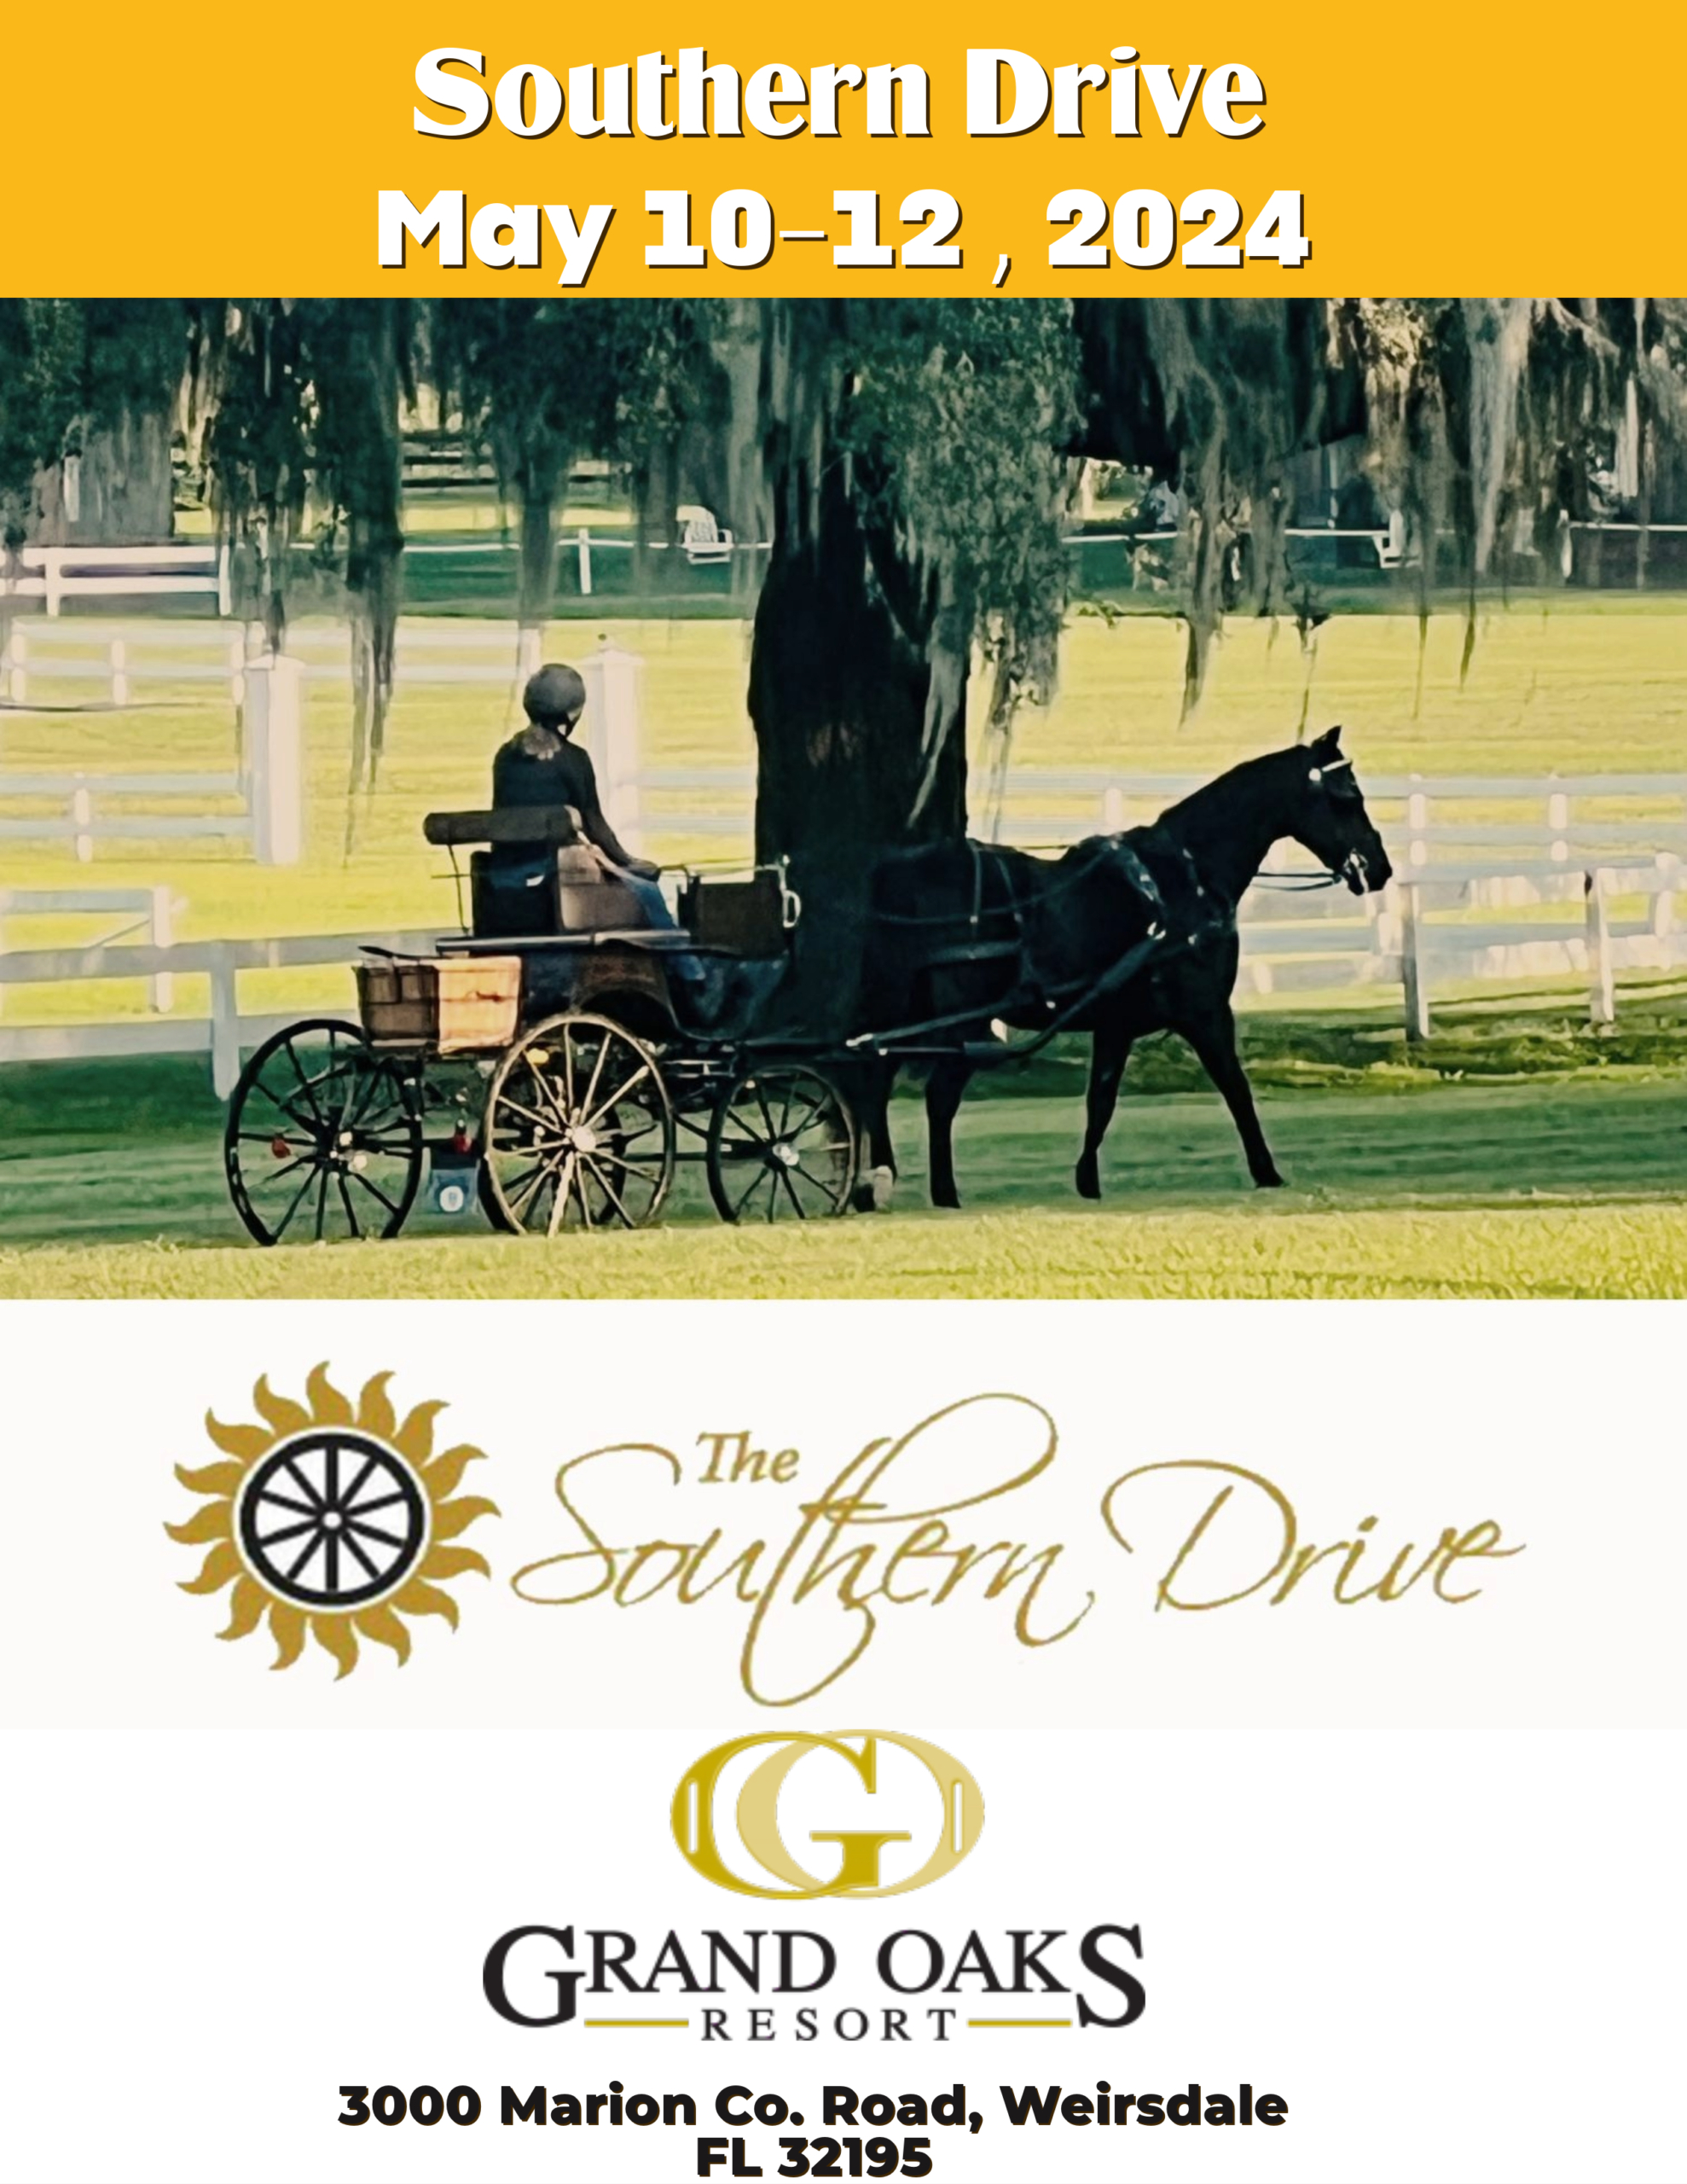 carriage driving at the Grand Oaks Resort